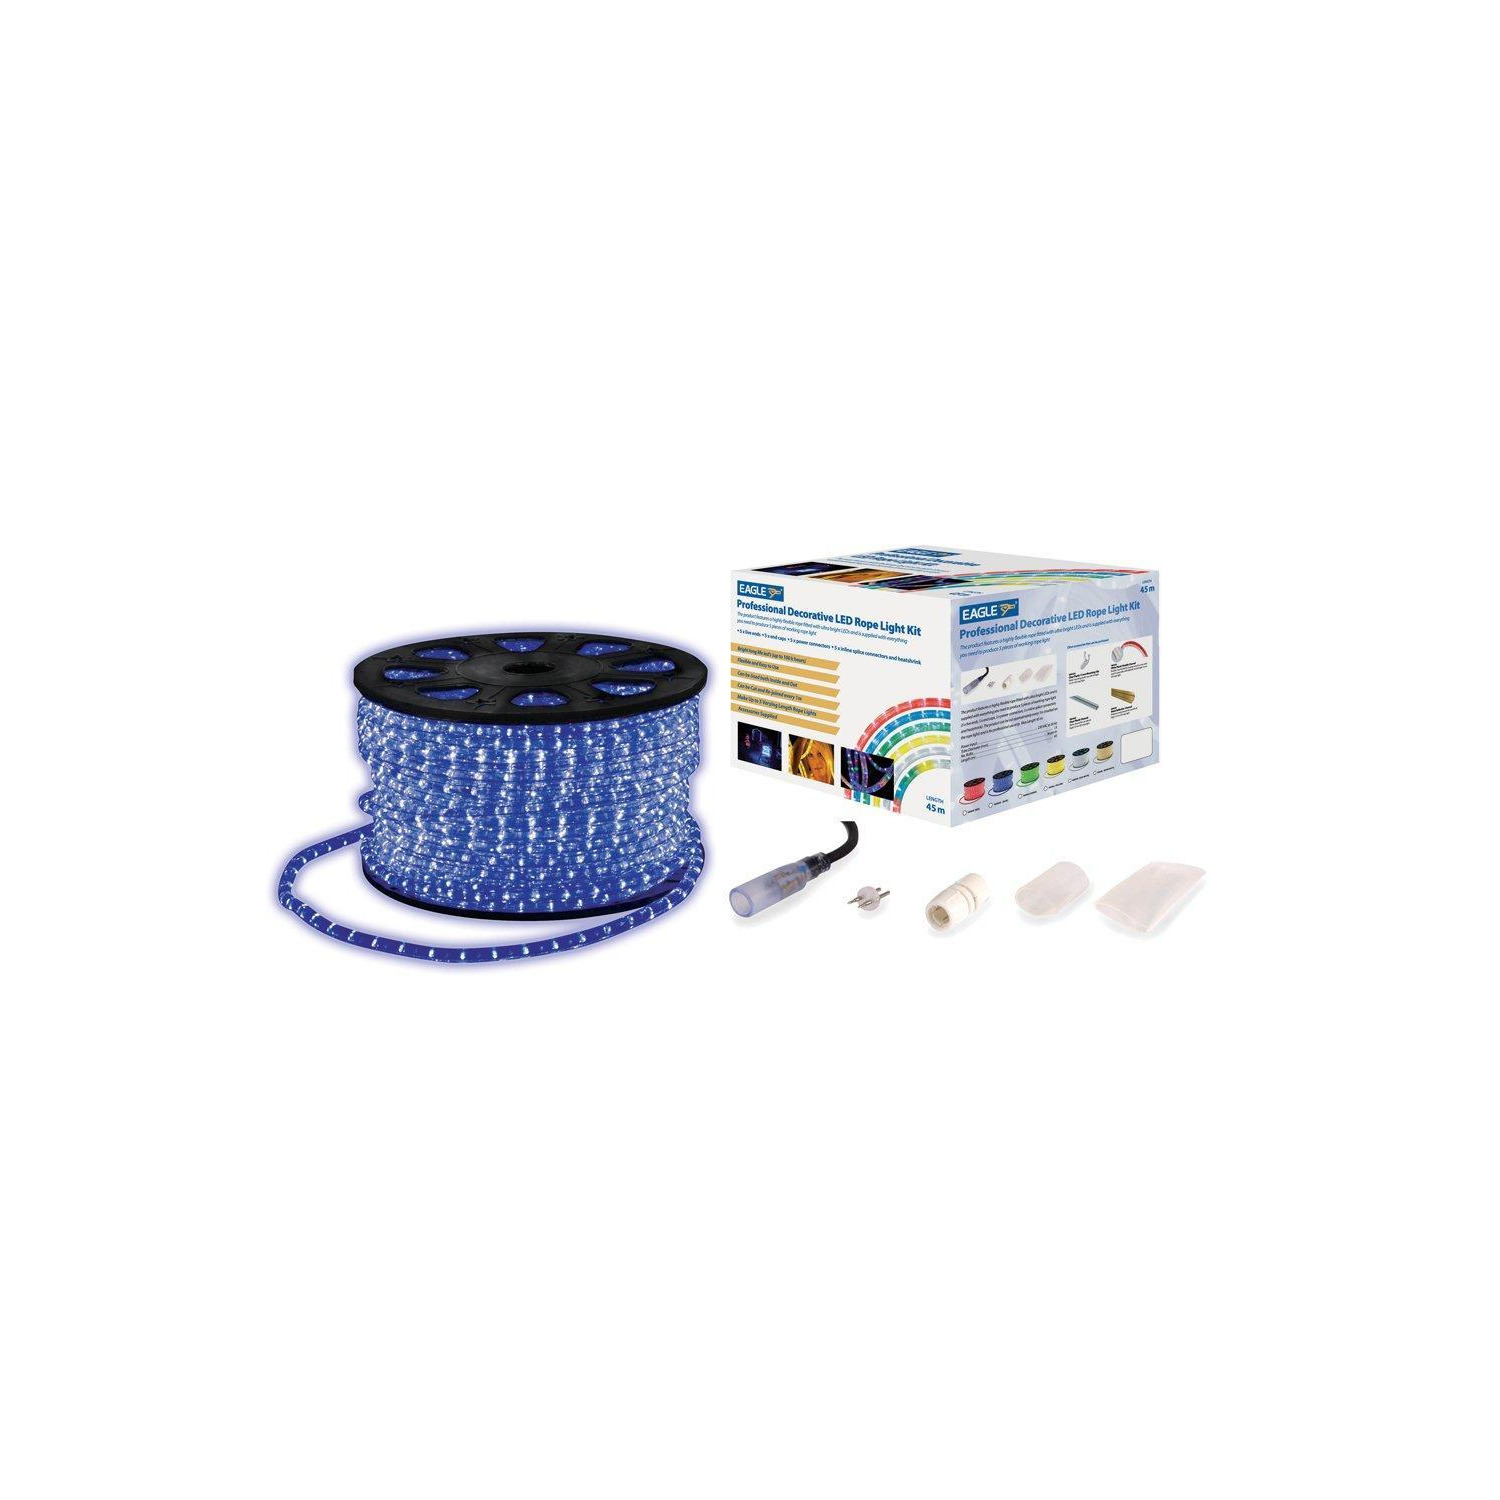 Static LED Rope Light Kit With Wiring Accessories Kit 45m Blue - image 1